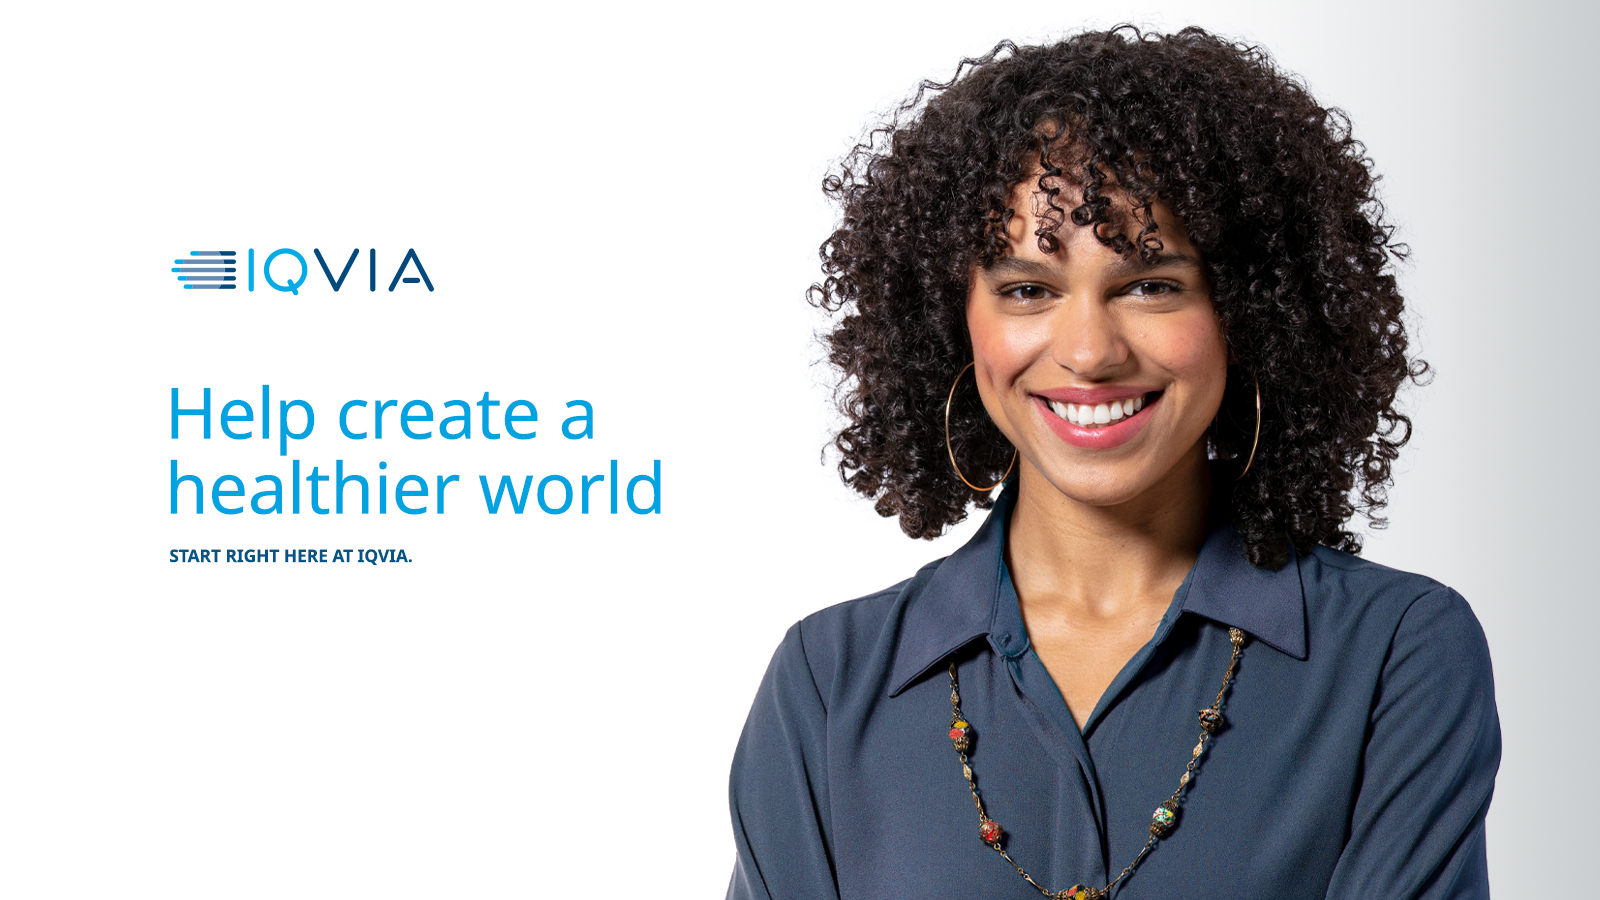 Working at IQVIA | Jobs and Careers at IQVIA